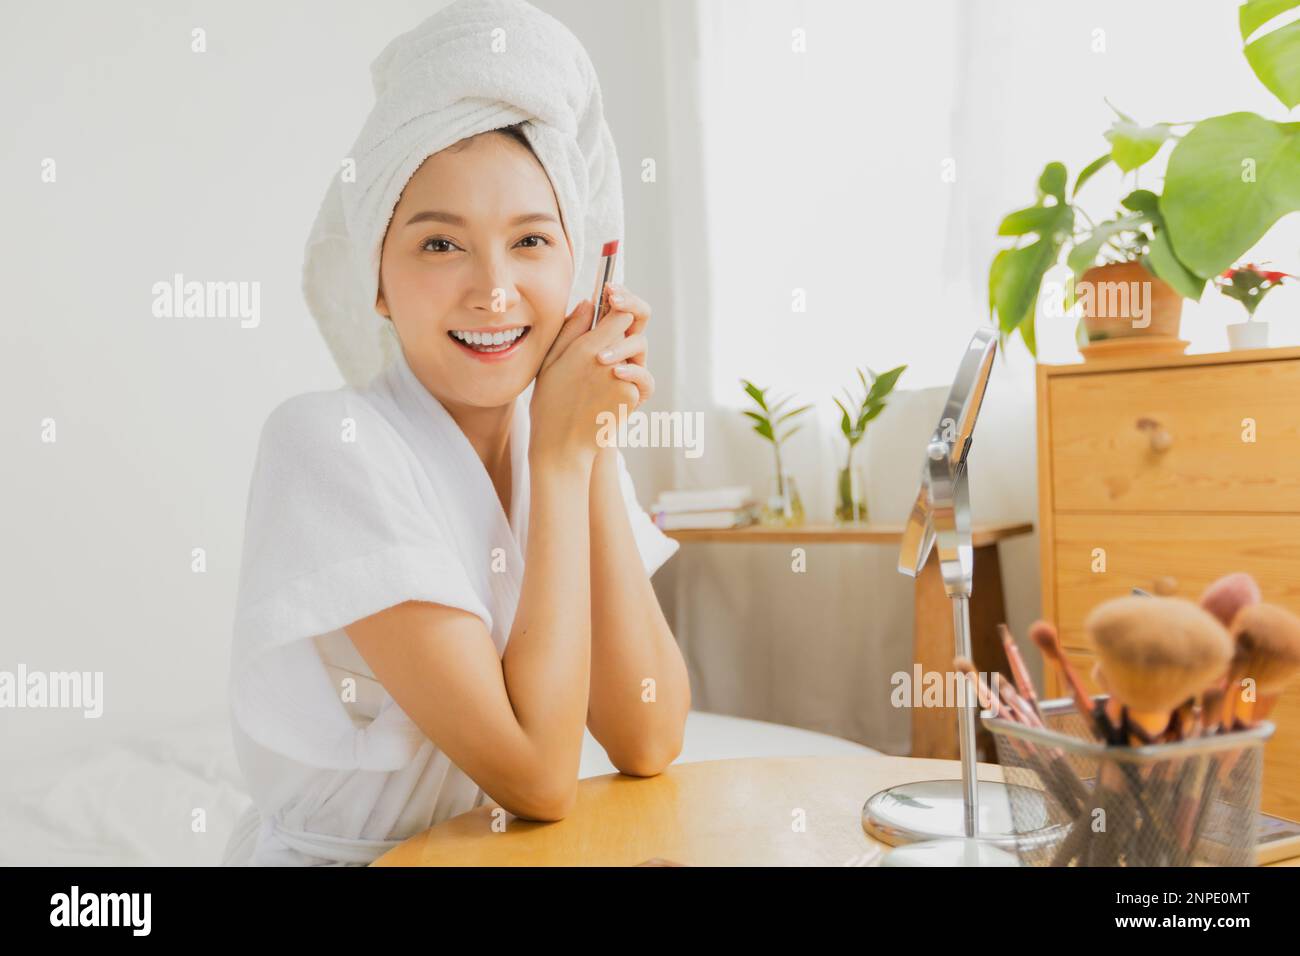 Asian woman make-up with brushes Stock Photo